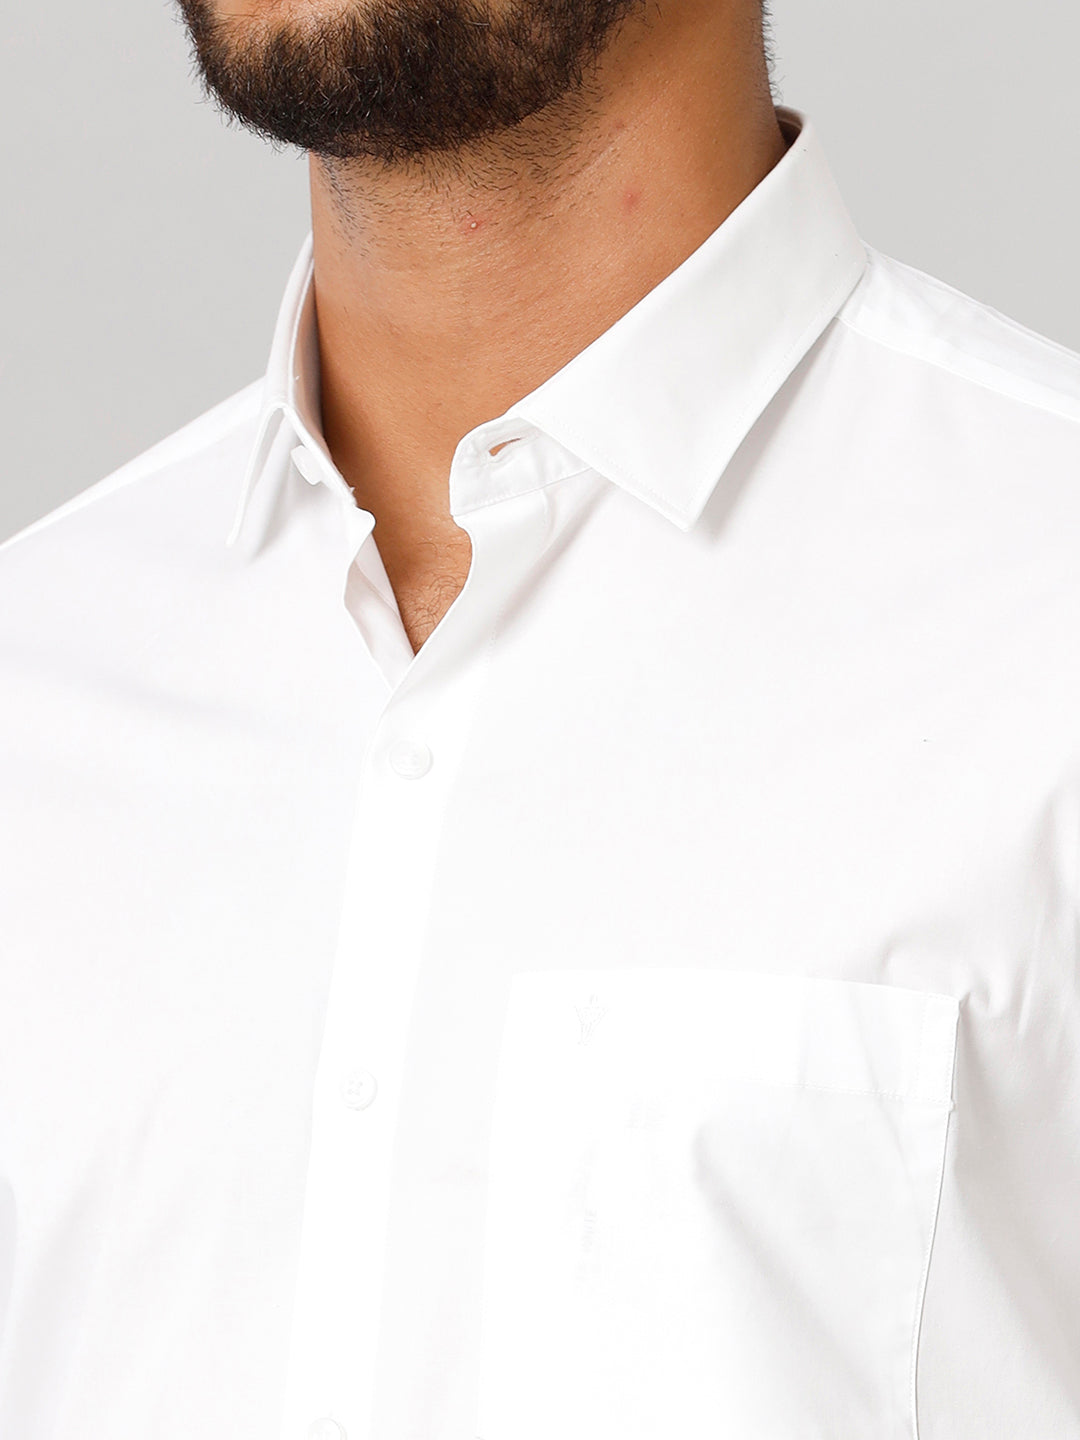 Mens 100% Cotton Half Sleeves White Shirt Victory-Zoom view